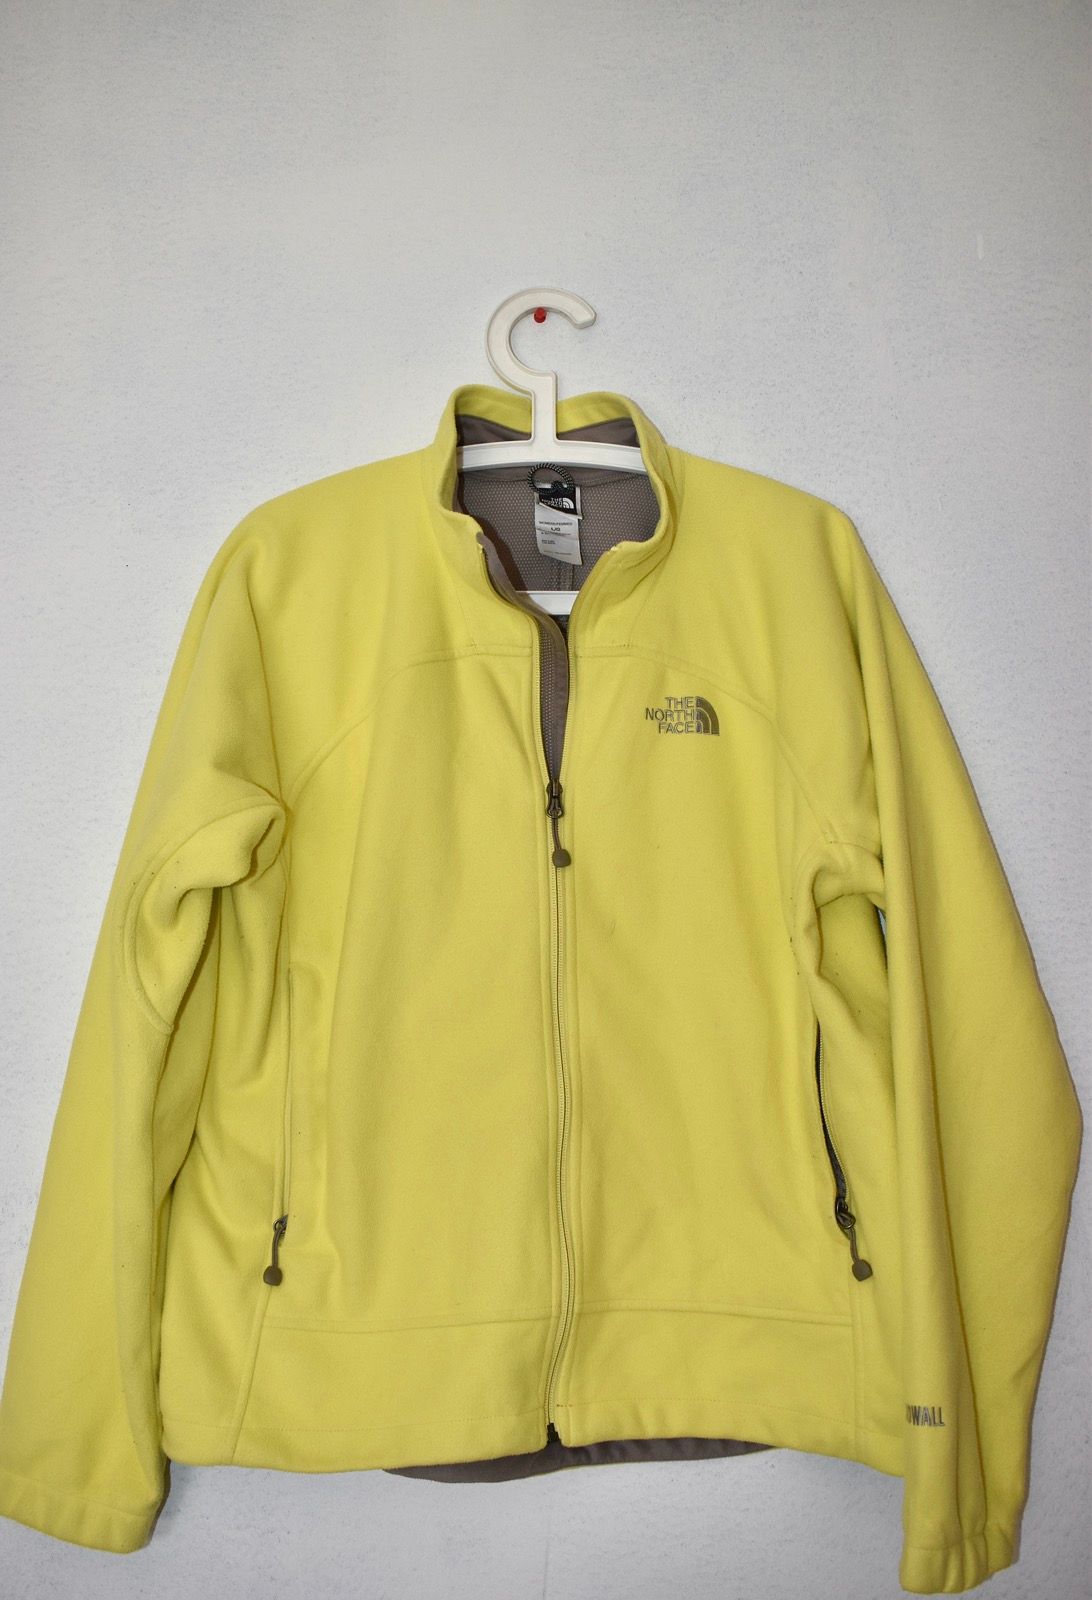 The North Face North Face Face Jacket Rn 61661 Ca 30516 | Grailed